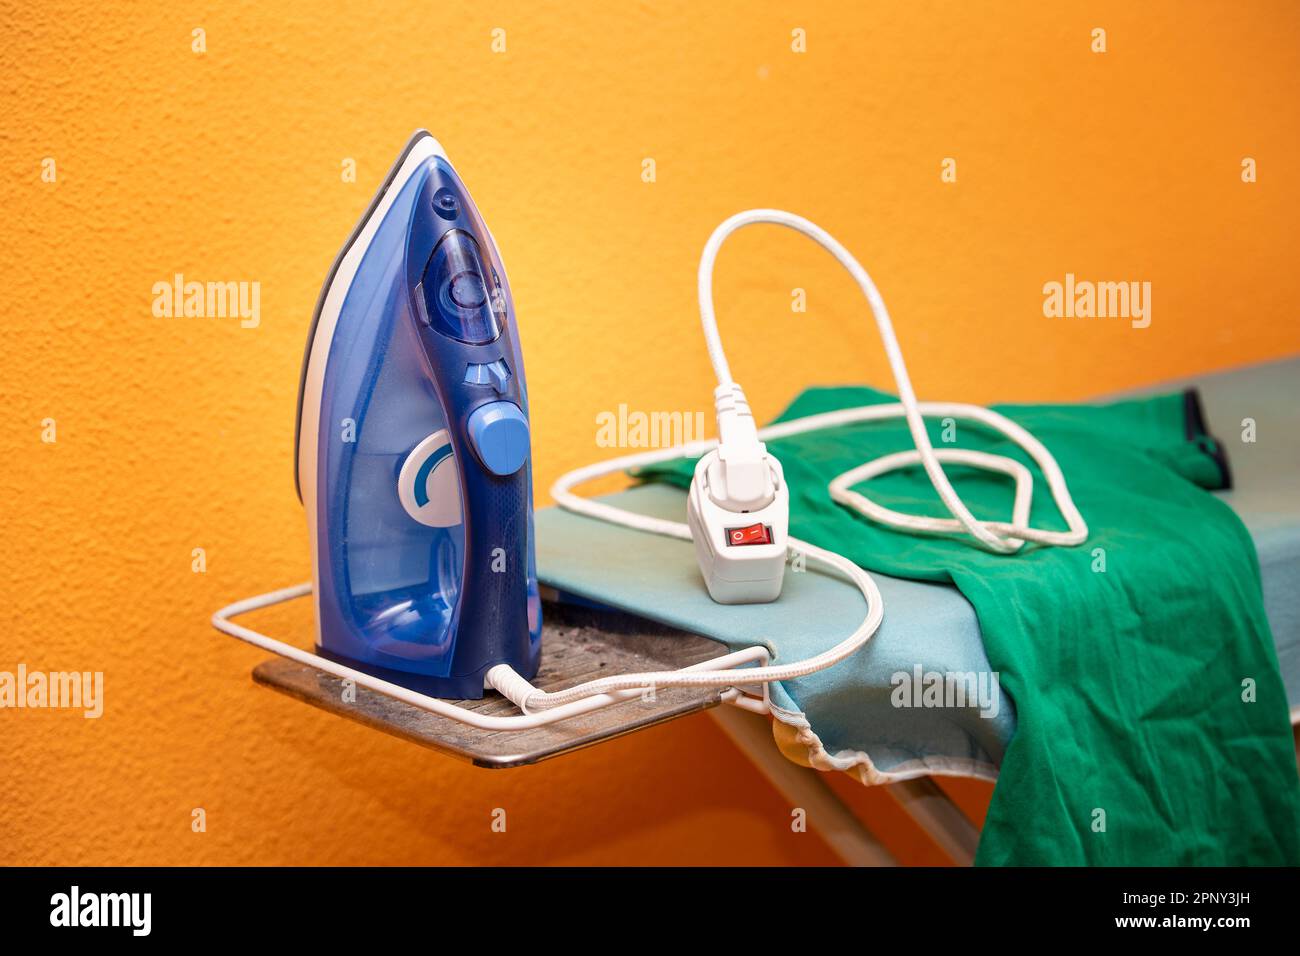 blue steam iron on ironing board unplugged and with wrinkled clothes Stock Photo